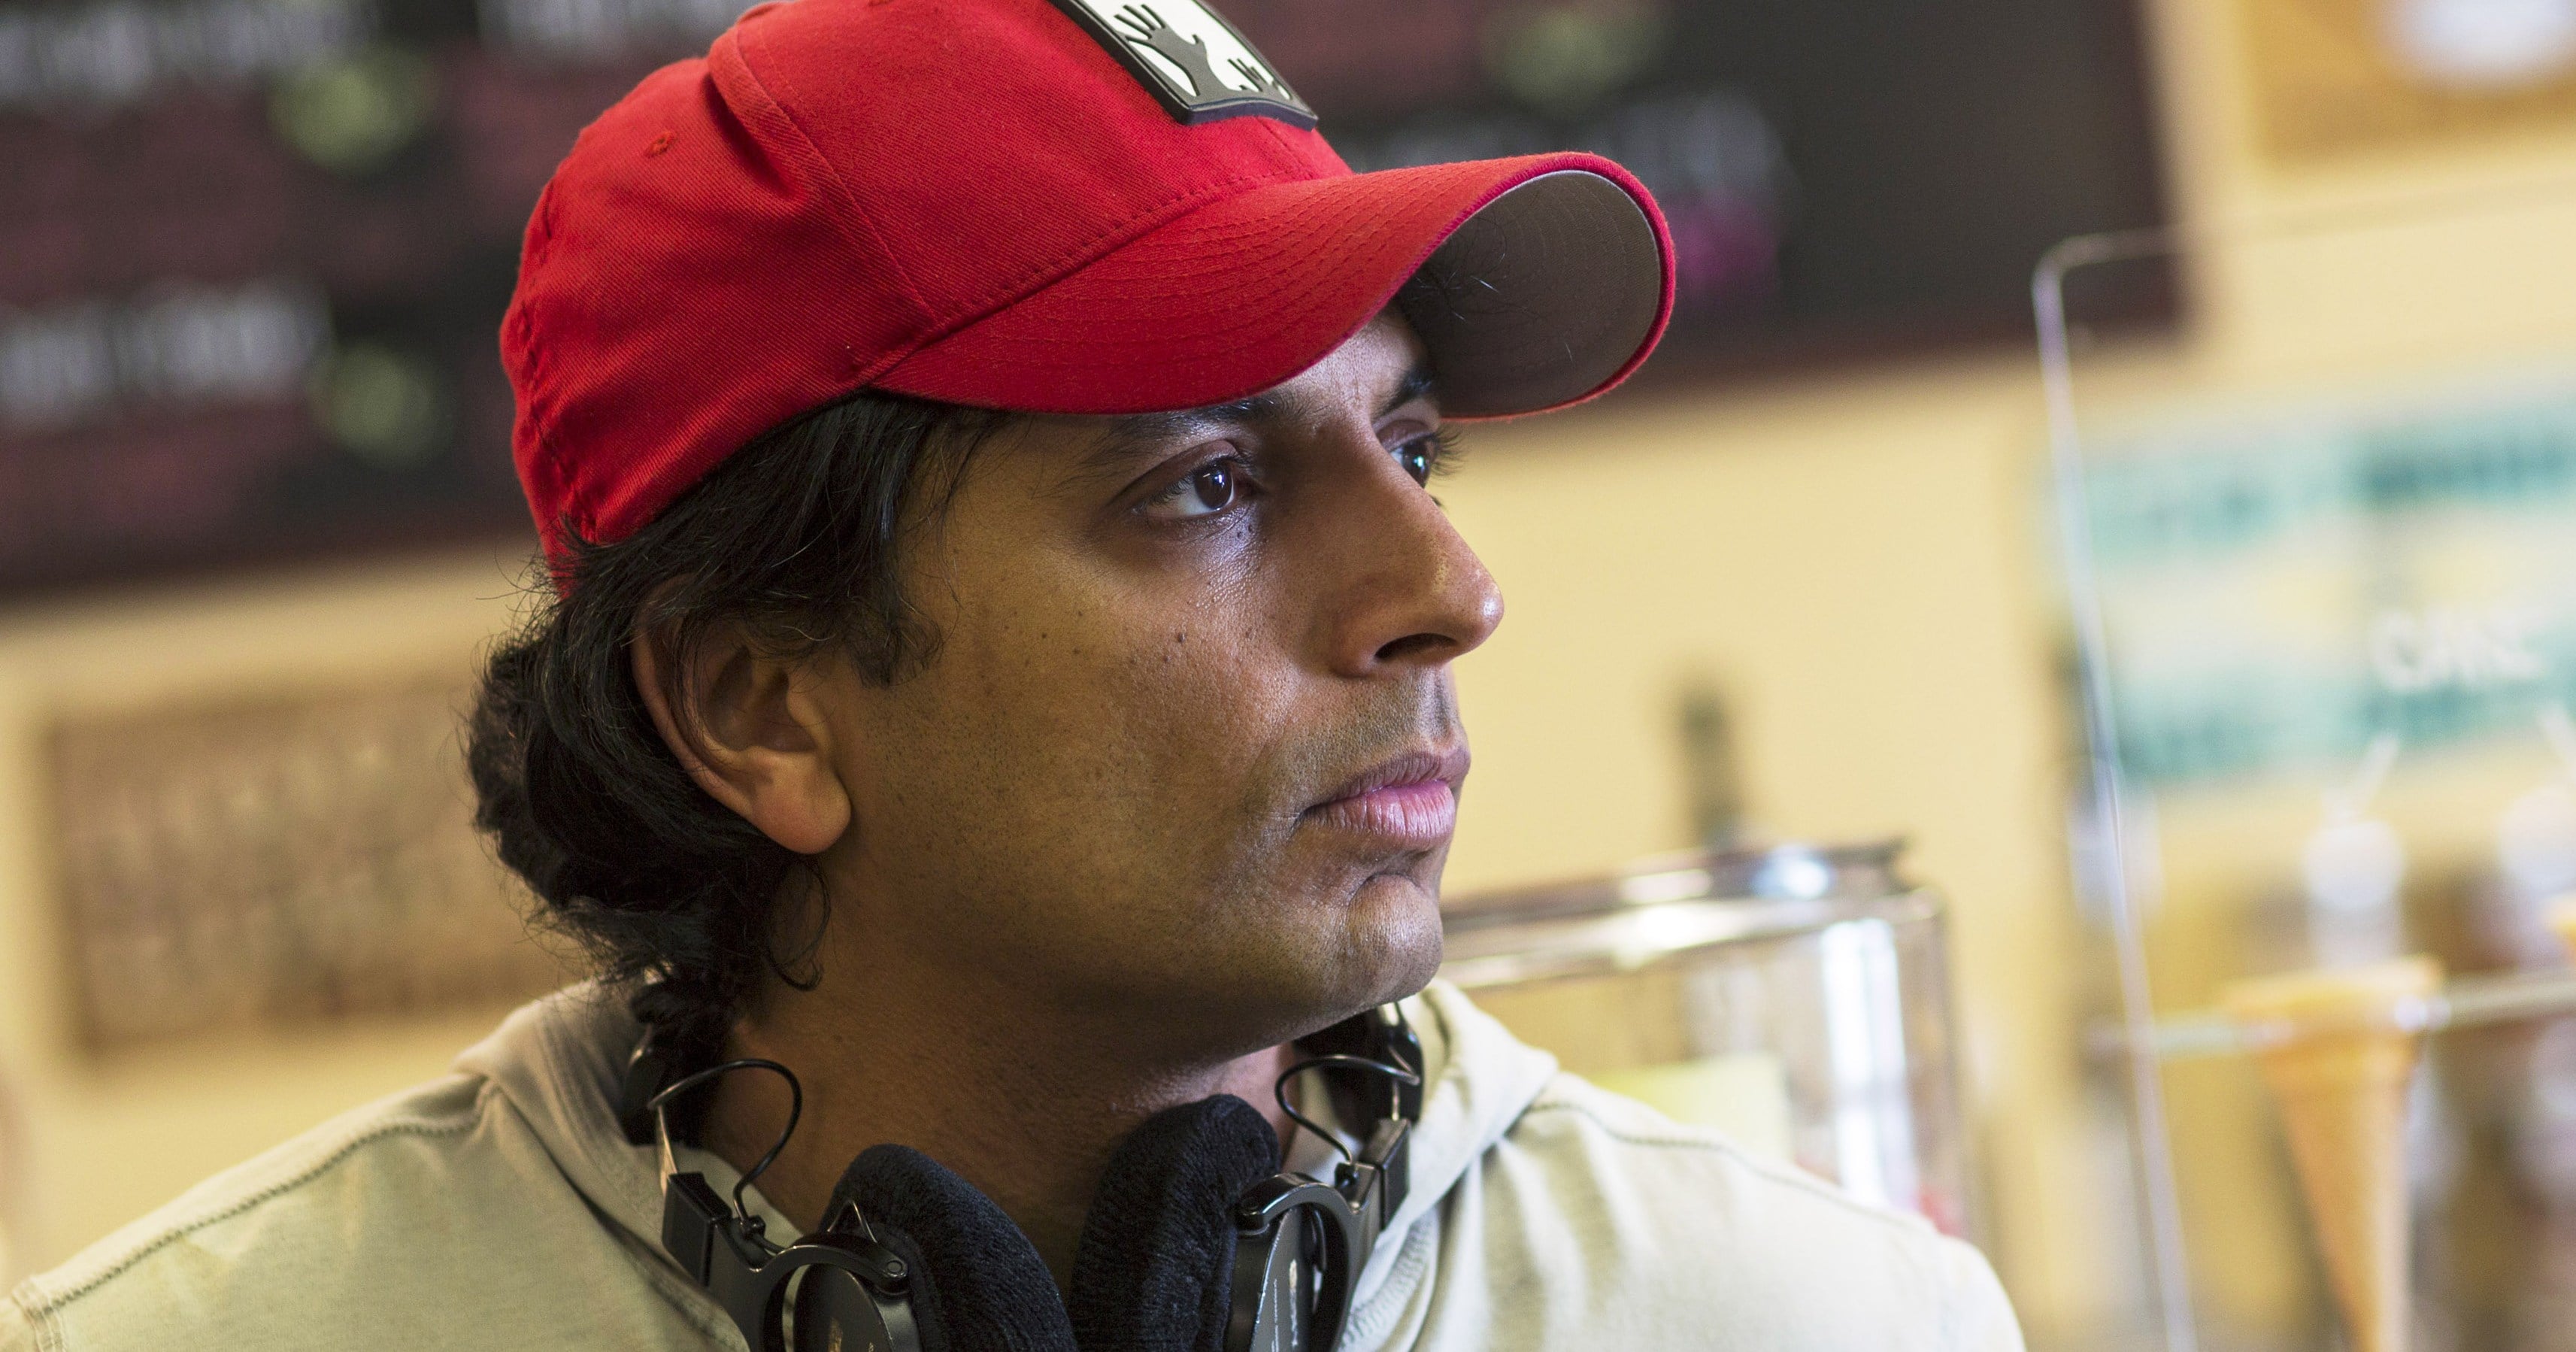 What Does the 'M' In M. Night Shyamalan Stand For?